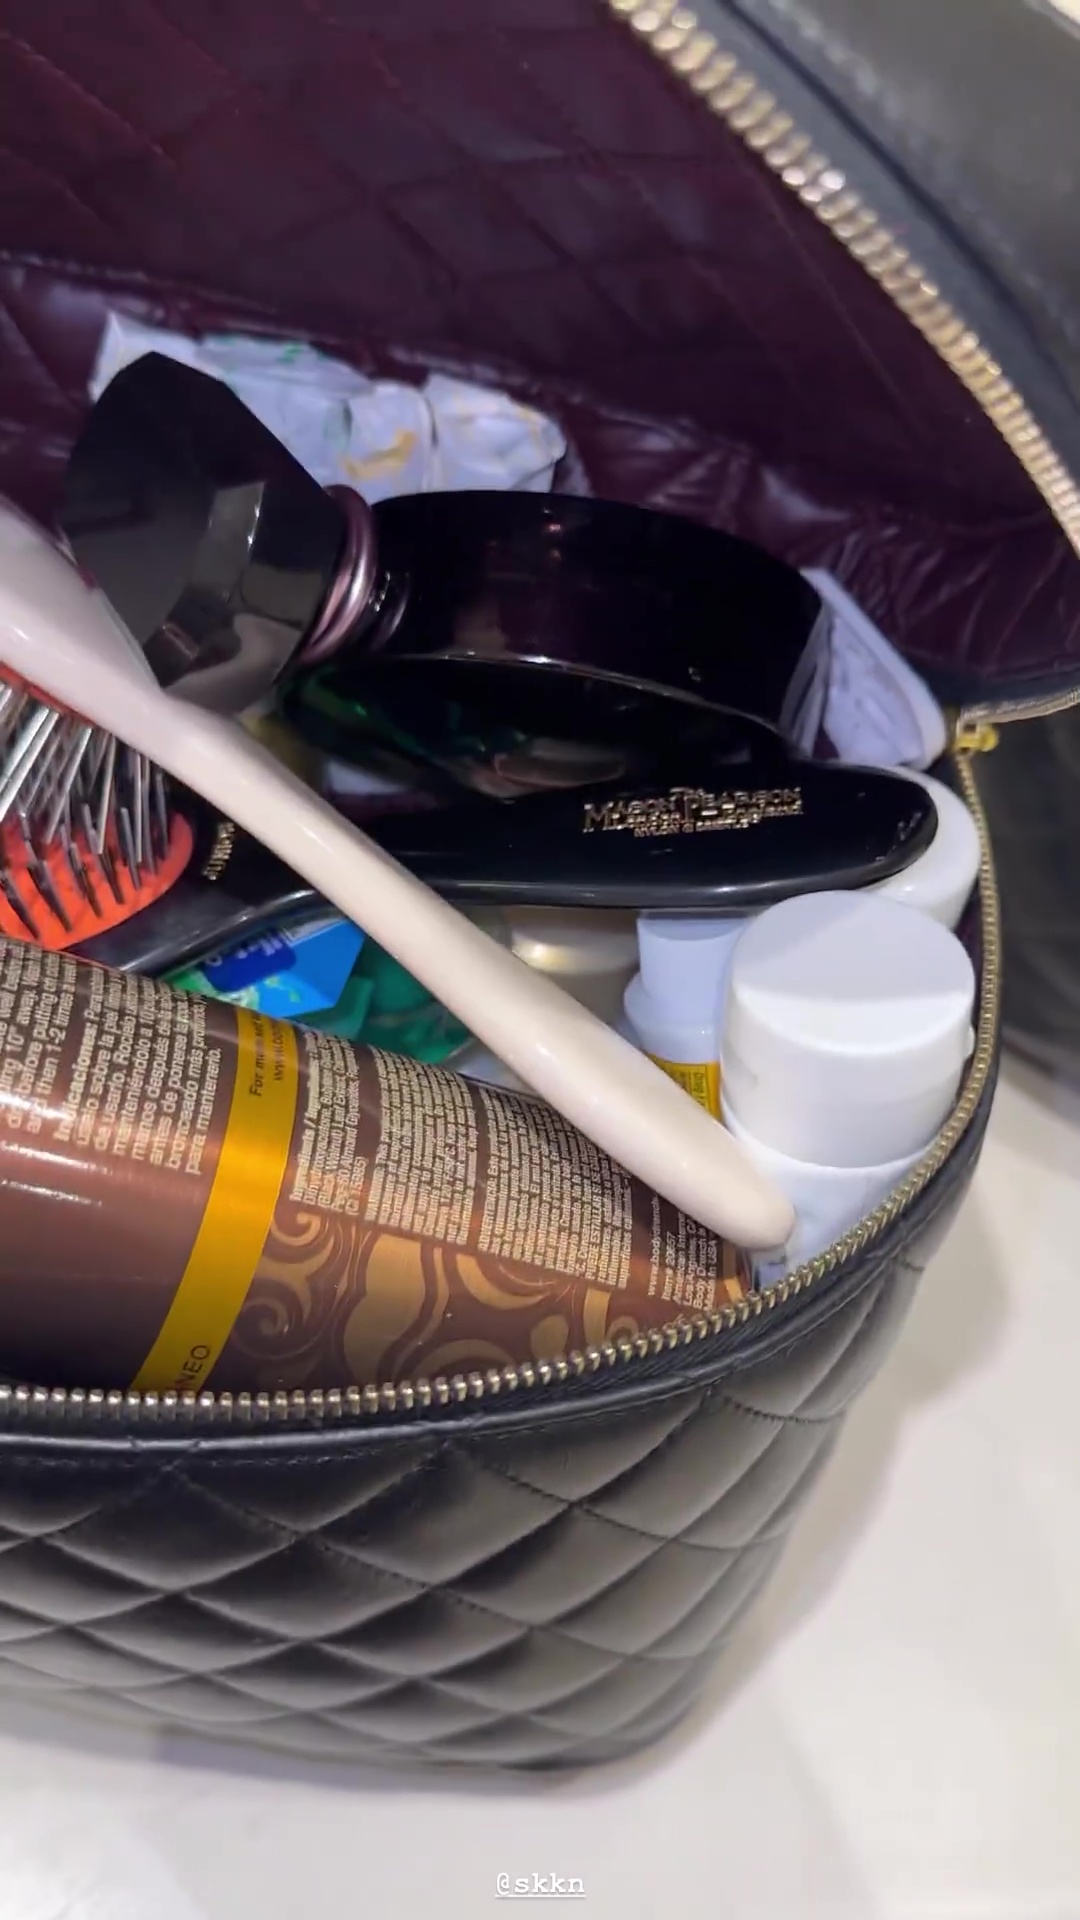 Kim Kardashian reveals what’s really in her travel toiletry bag and fans are shocked by ‘relatable’ star’s ‘cheap’ items